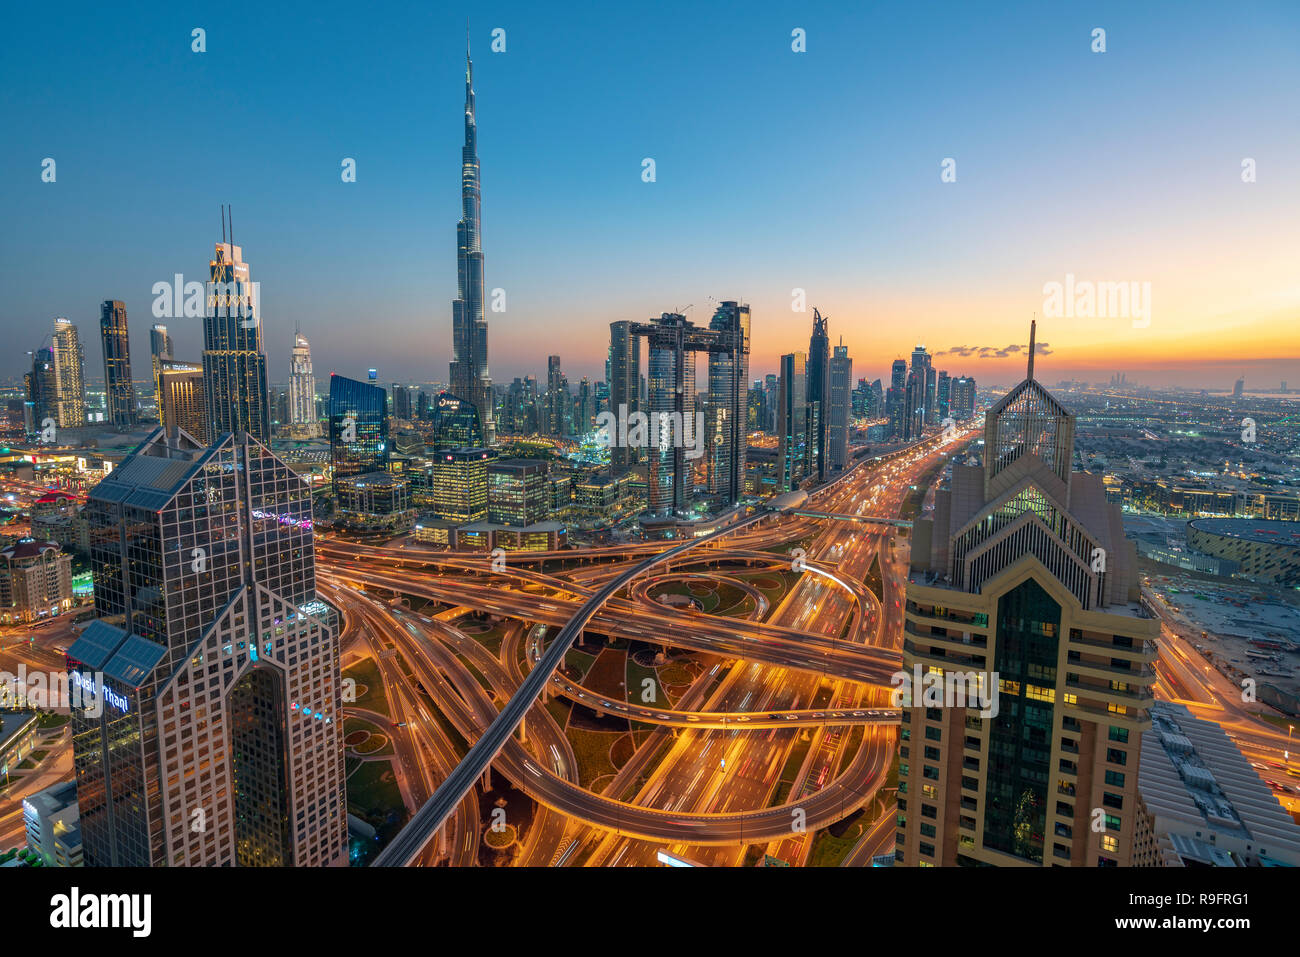 Cityscape view of Burj Khalifa and complex highway interchange and skyscrapers along Sheikh Zayed road in the evening in Dubai, United Arab Emirates,  Stock Photo